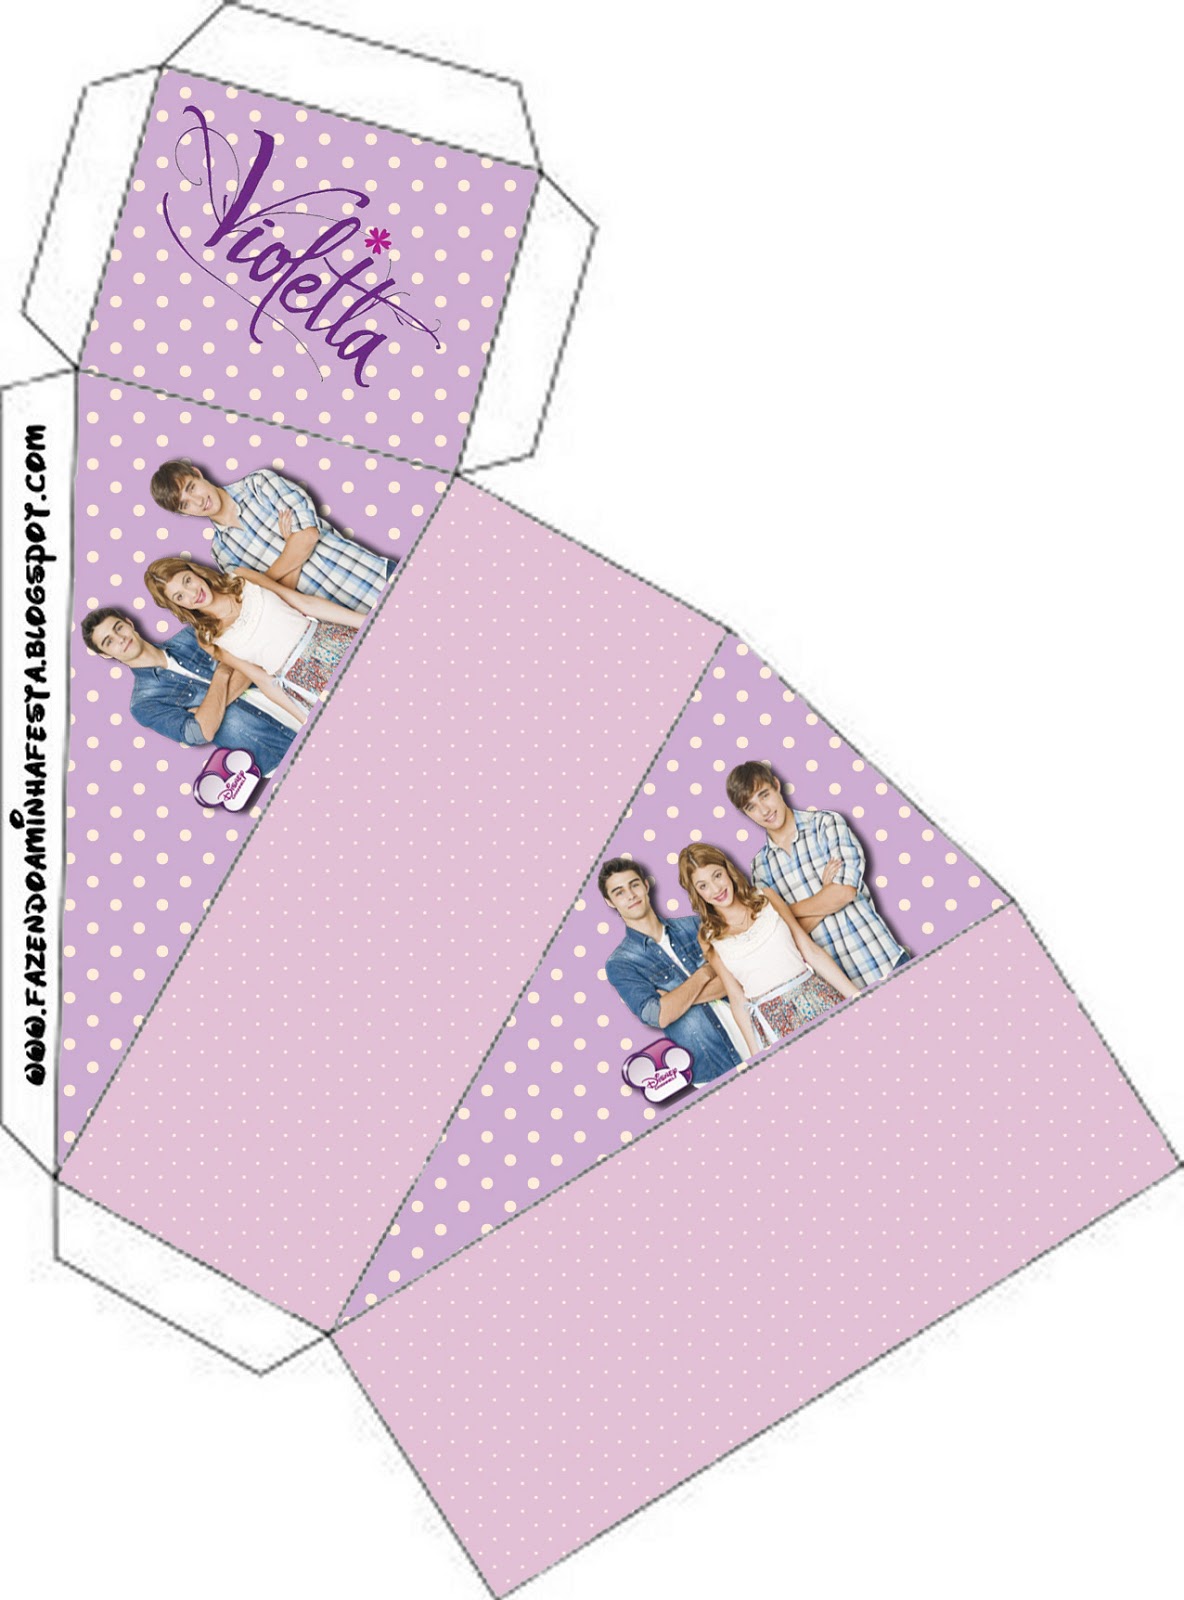 Violetta Free Printable Boxes. Oh My Fiesta! in english